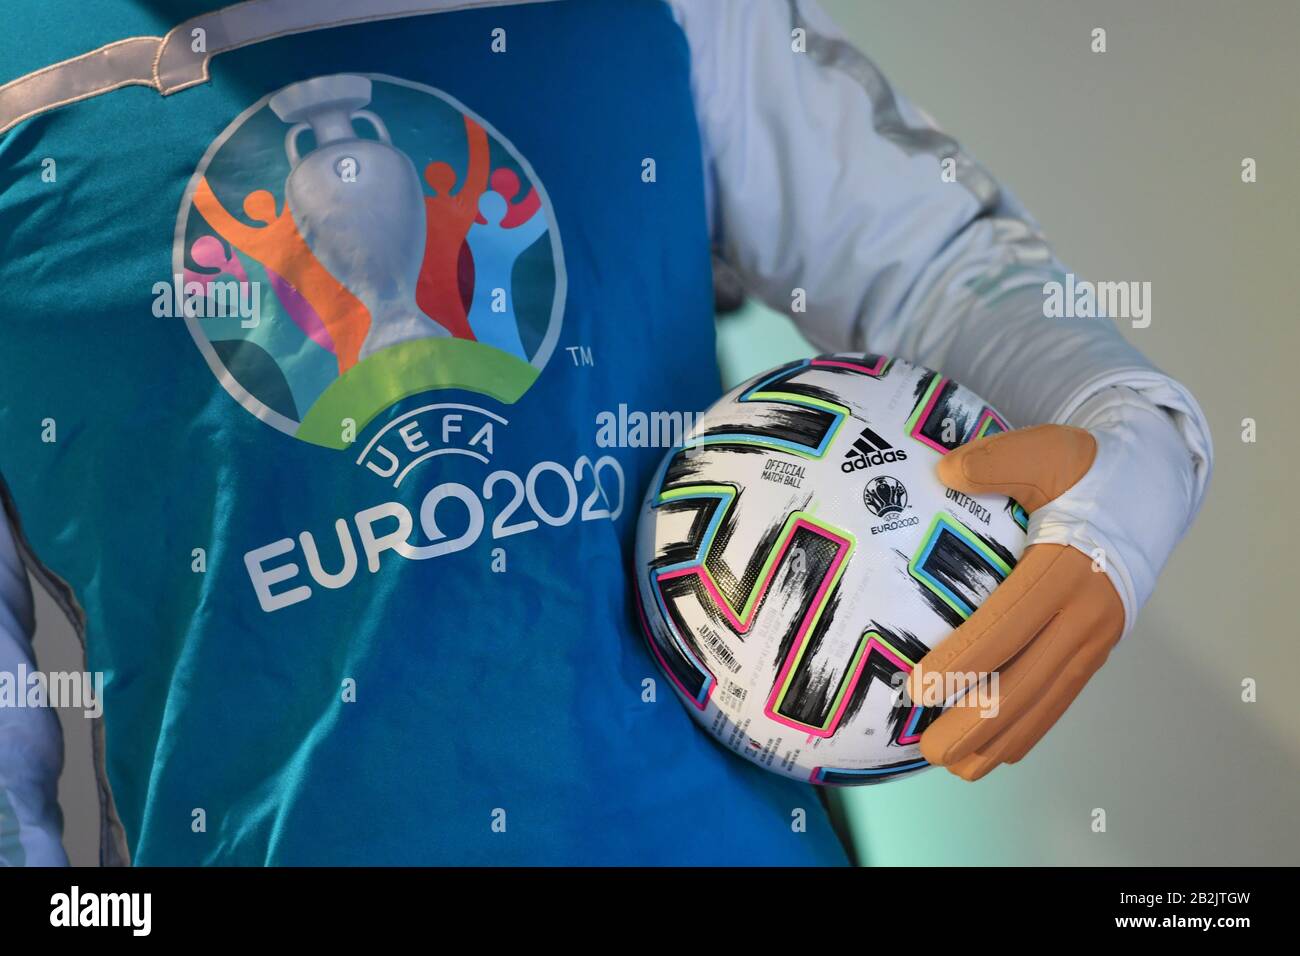 Close Up Mascot Skillzy with Uefa EURO 2020 logo, emblem and the official game ball. Press appointment? Munich loves Europe? in the Olympic Park? 100 days until the start of UEFA EURO 2020 on March 4th, 2020 in Munich/Olympiapark? SVEN SIMON Fotoagentur GmbH & Co. Pressefoto KG # Prinzess-Luise-Str. 41 # 45479 M uelheim/R uhr # Tel. 0208/9413250 # Fax. 0208/9413260 # GLS Bank # BLZ 430 609 67 # Kto. 4030 025 100 # IBAN DE75 4306 0967 4030 0251 00 # BIC GENODEM1GLS # www.svensimon.net. | usage worldwide Stock Photo